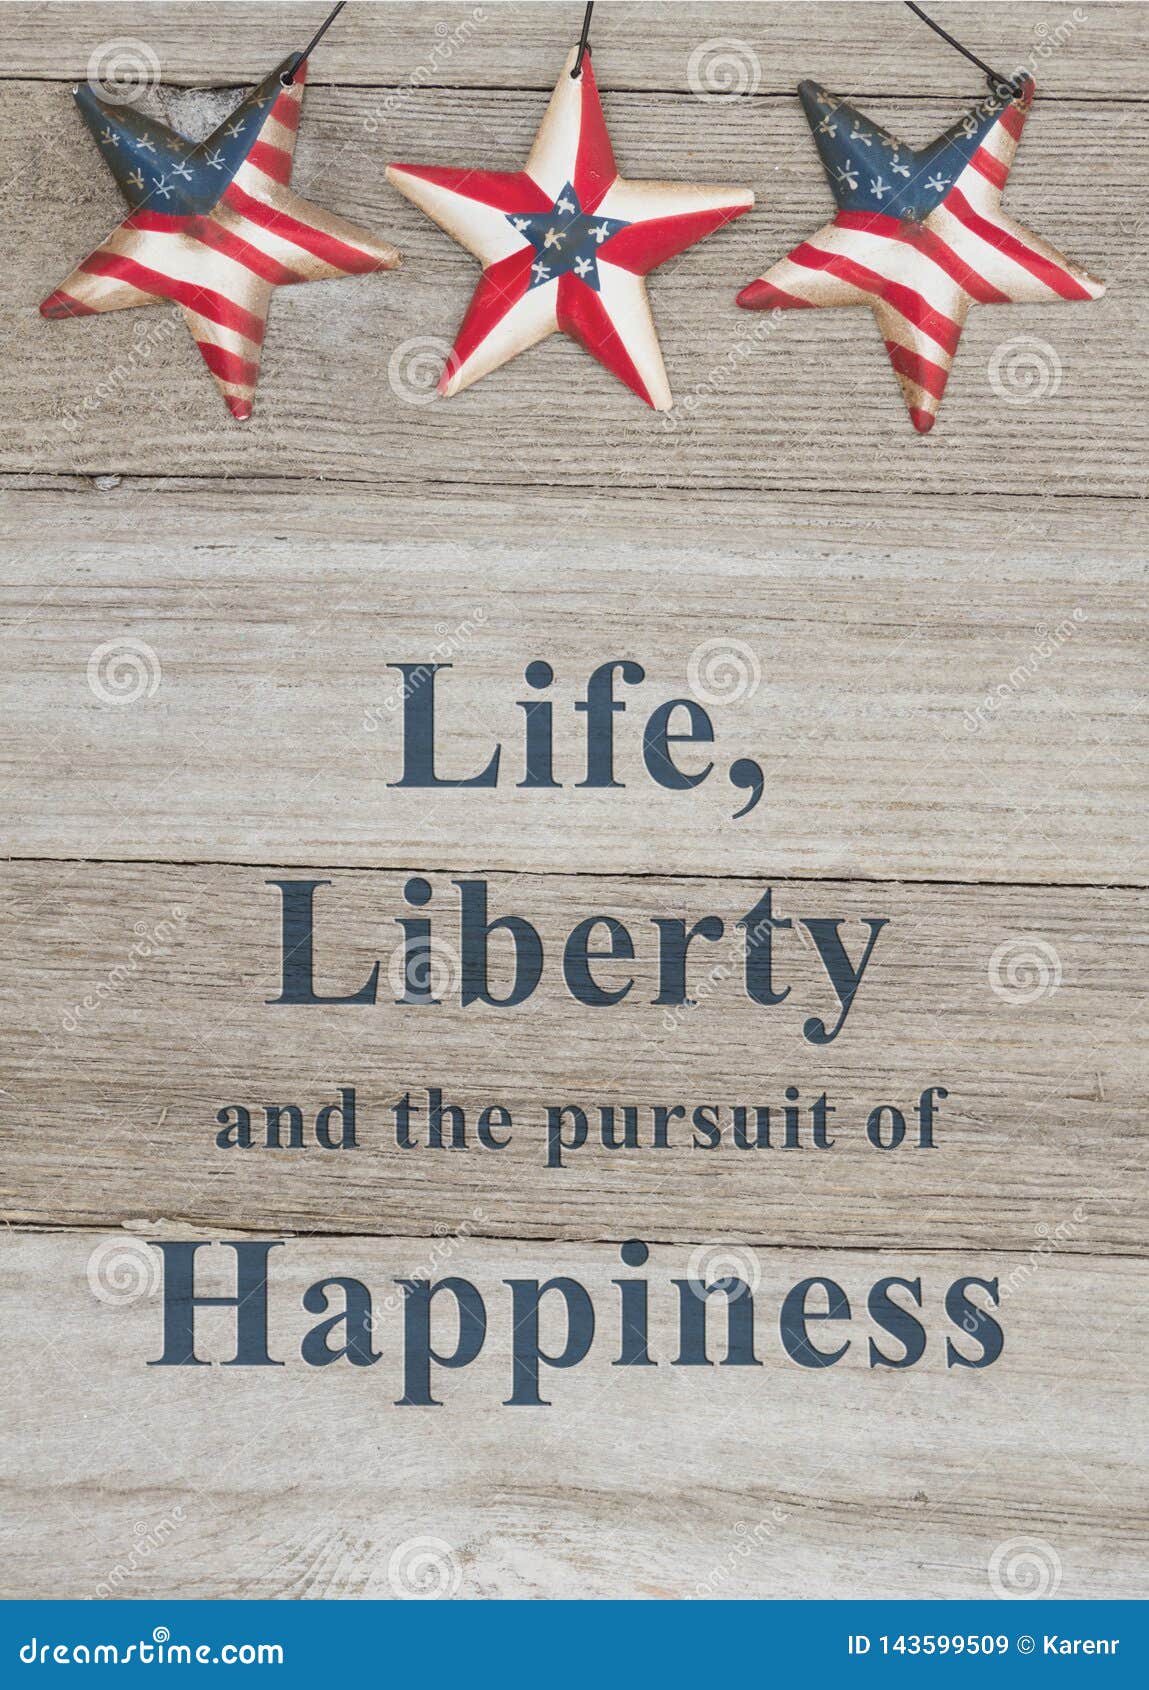 usa patriotic message of life liberty and happiness